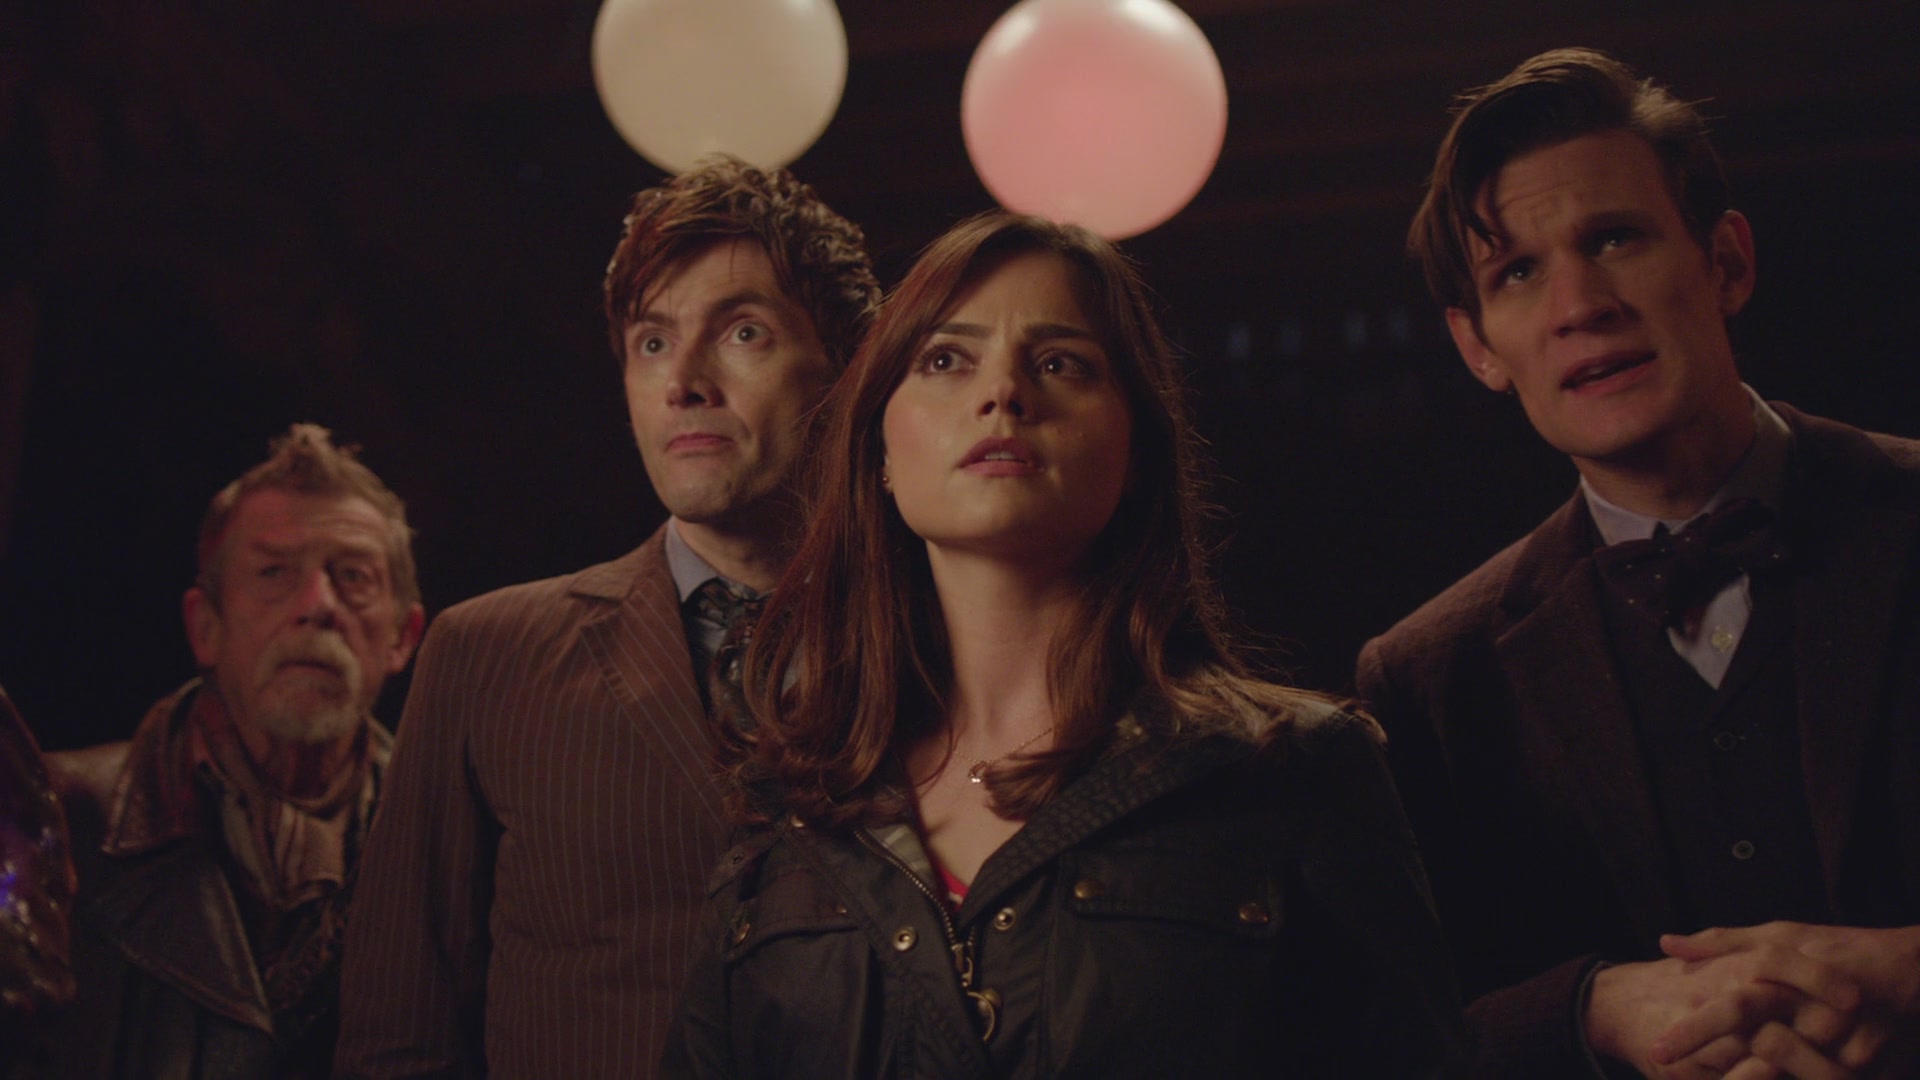 DayOfTheDoctor-Caps-0802.jpg